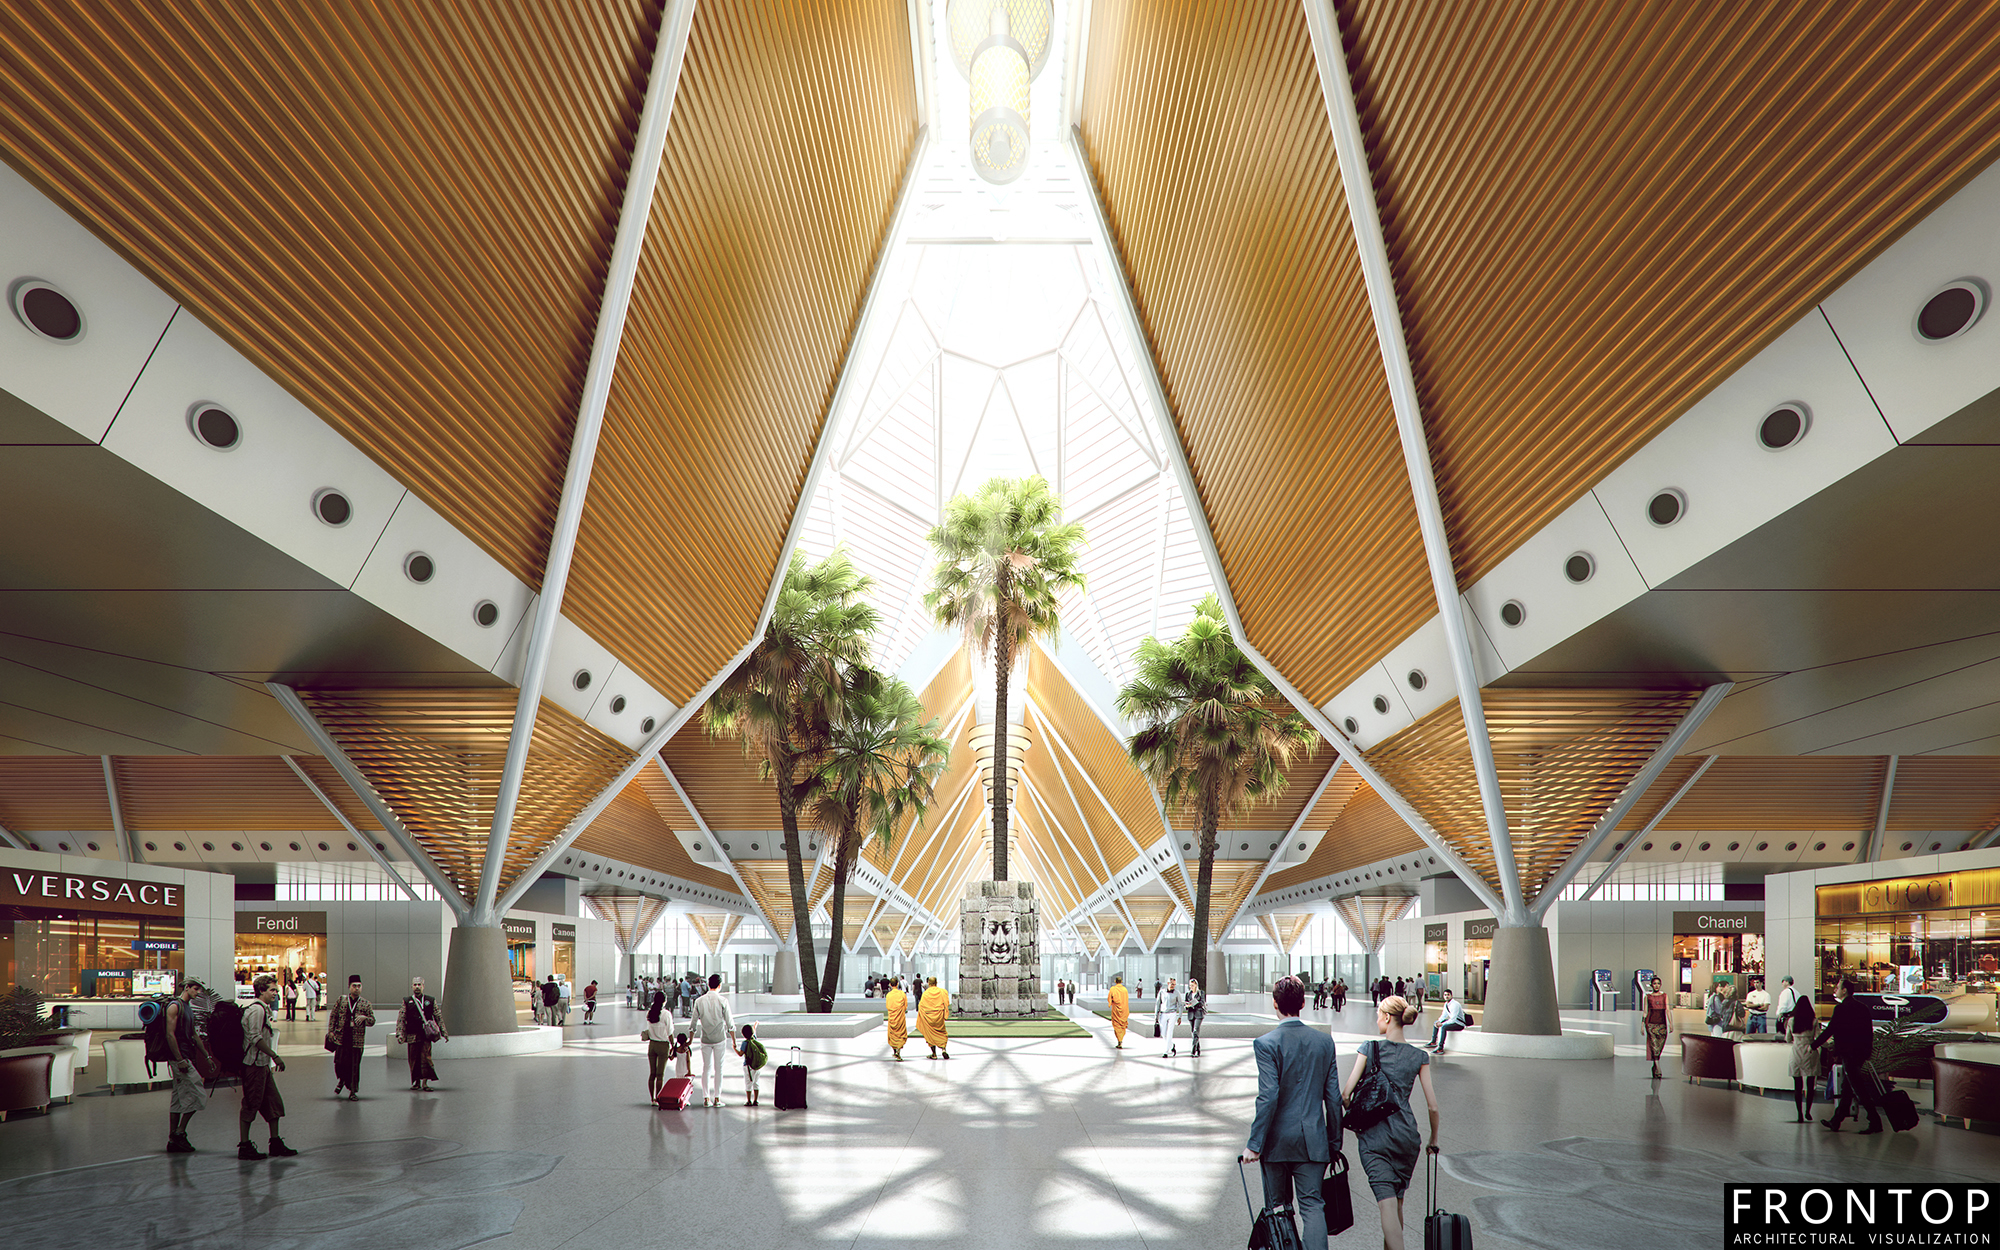 New Arrival China Sketch Architectural Design - Wuge Airport – Frontop